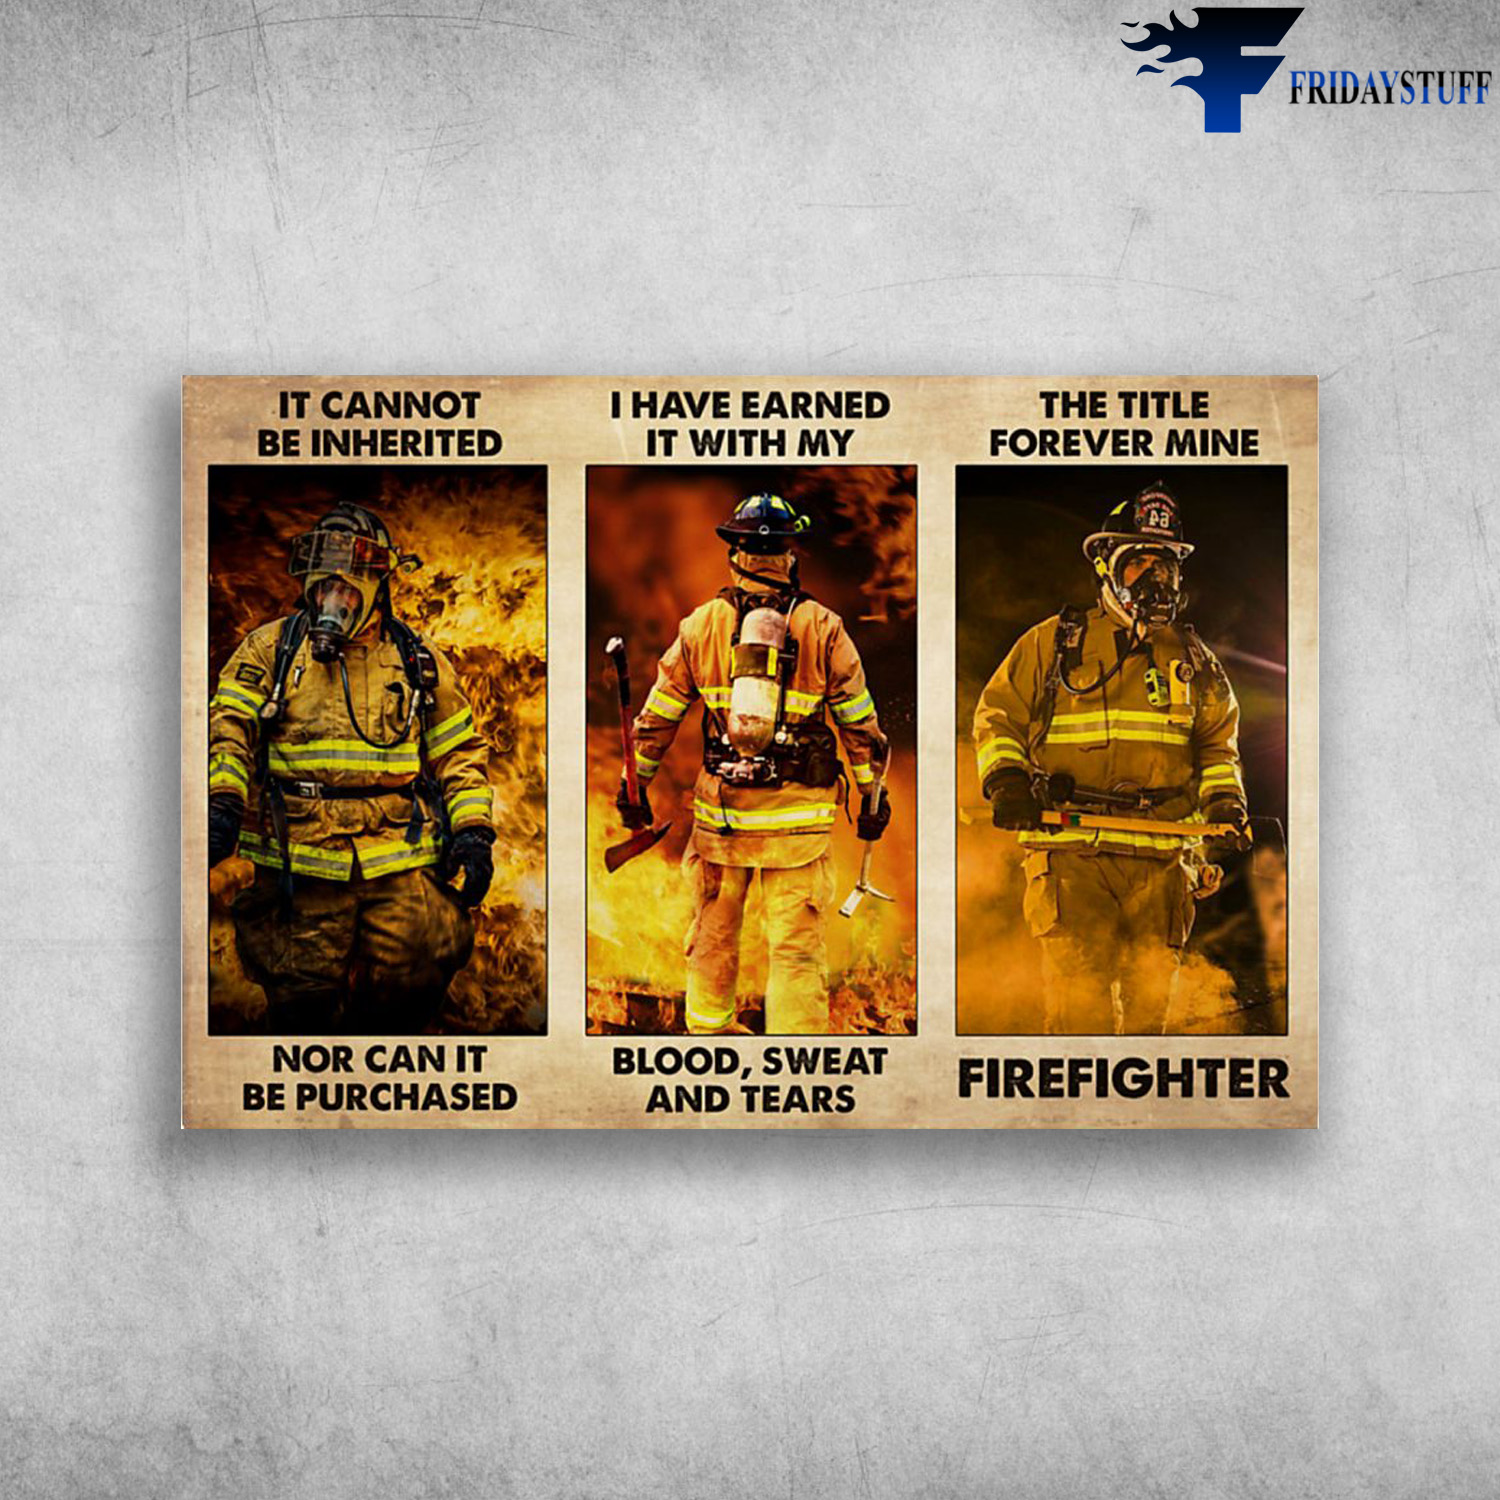 The Firefighter - It Cannot Be Inherited, Nor Can It Be Purchased, I Have Earned It With My Blood, Swear And Tears